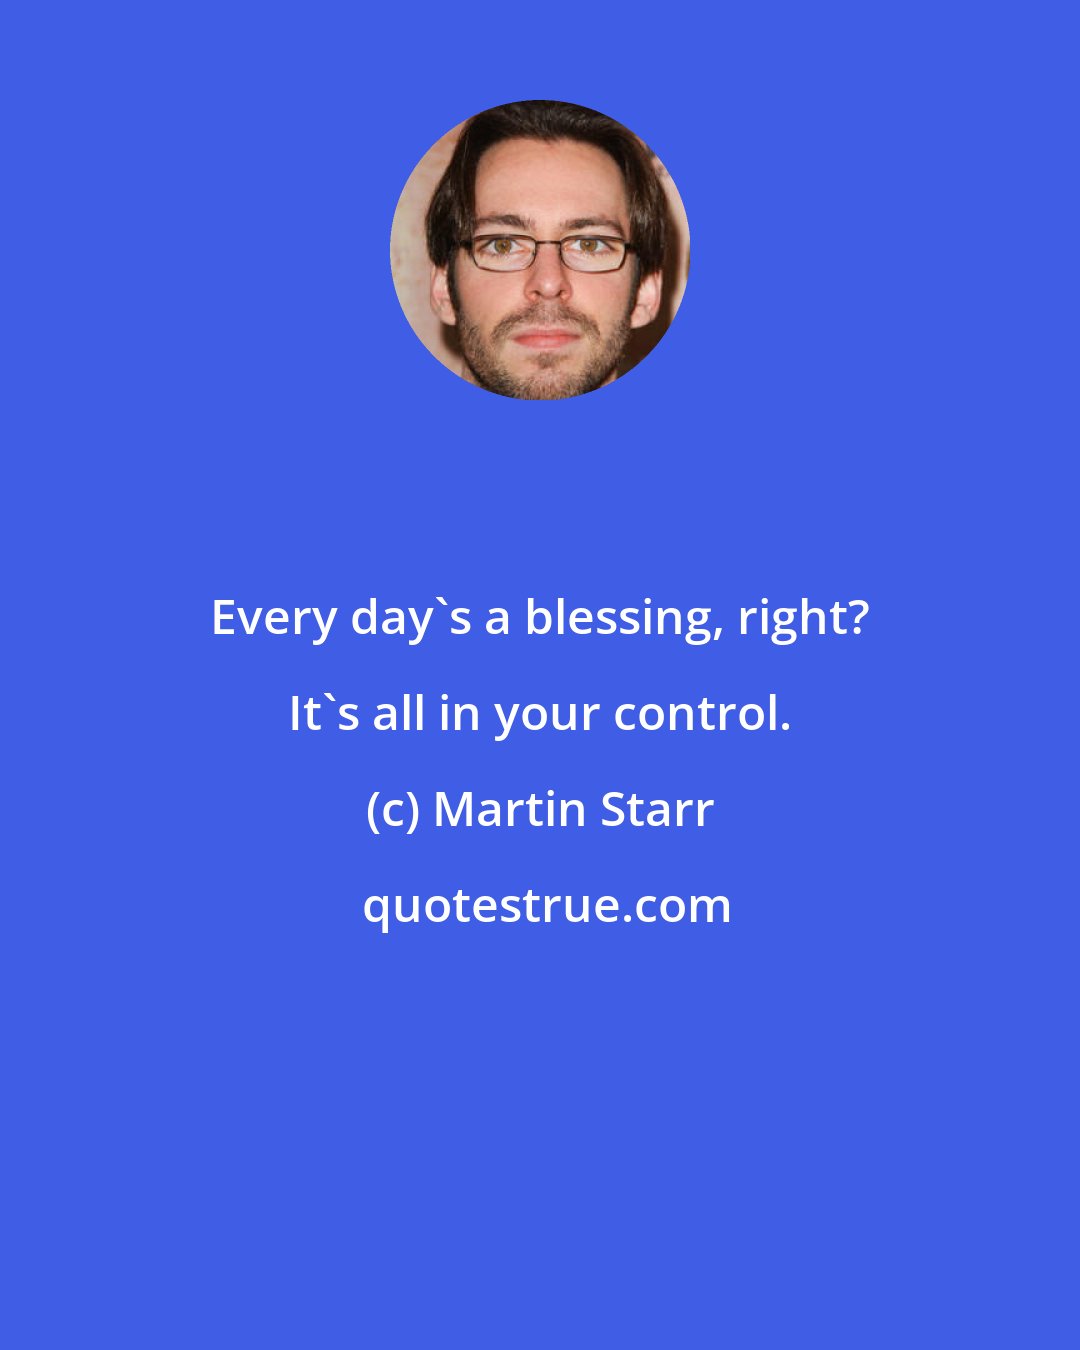 Martin Starr: Every day's a blessing, right? It's all in your control.